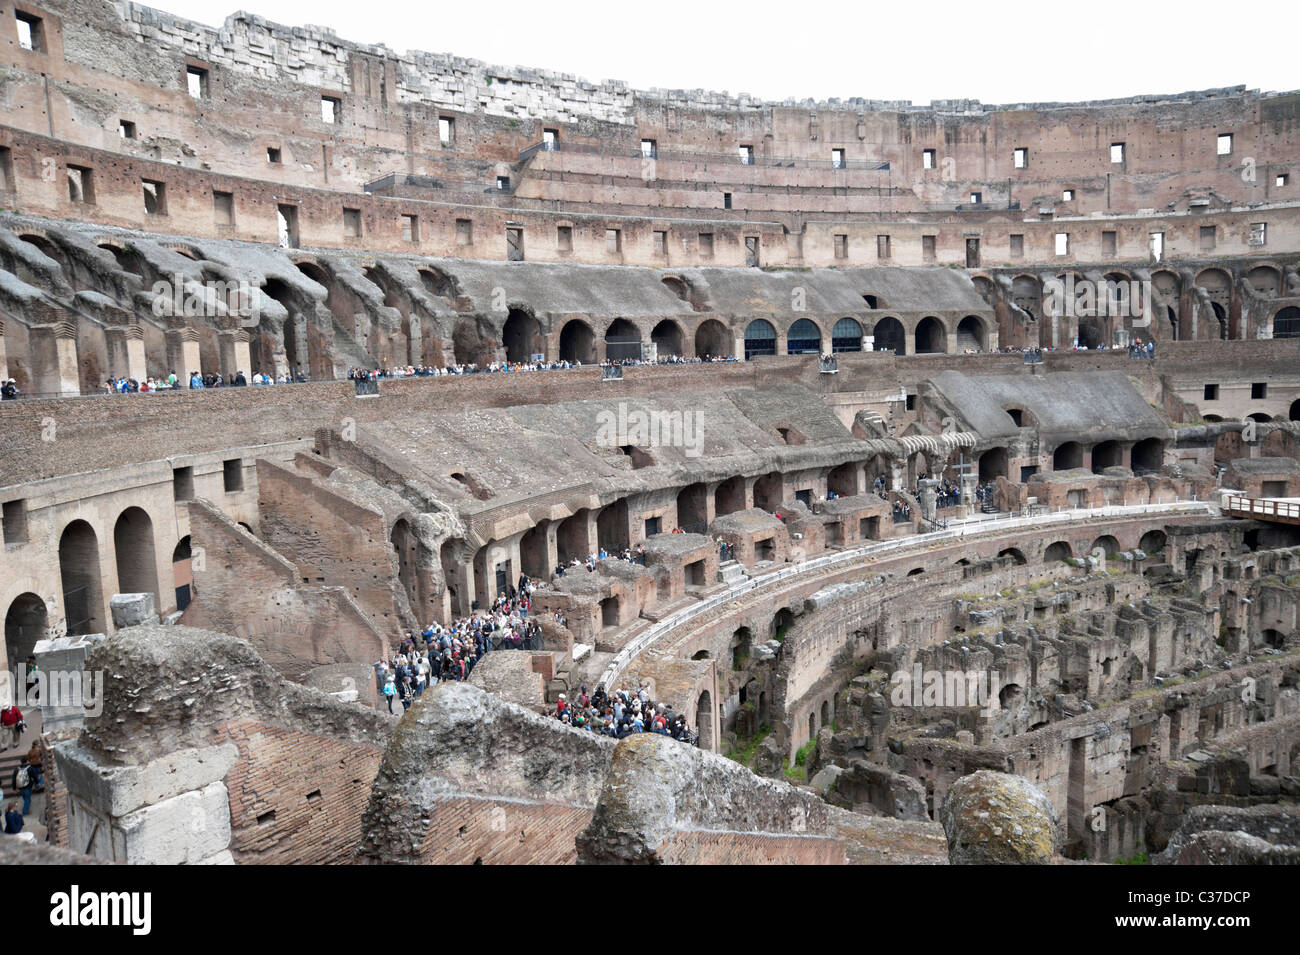 Colosseo (Coliseum) interior view with tourists Stock Photo